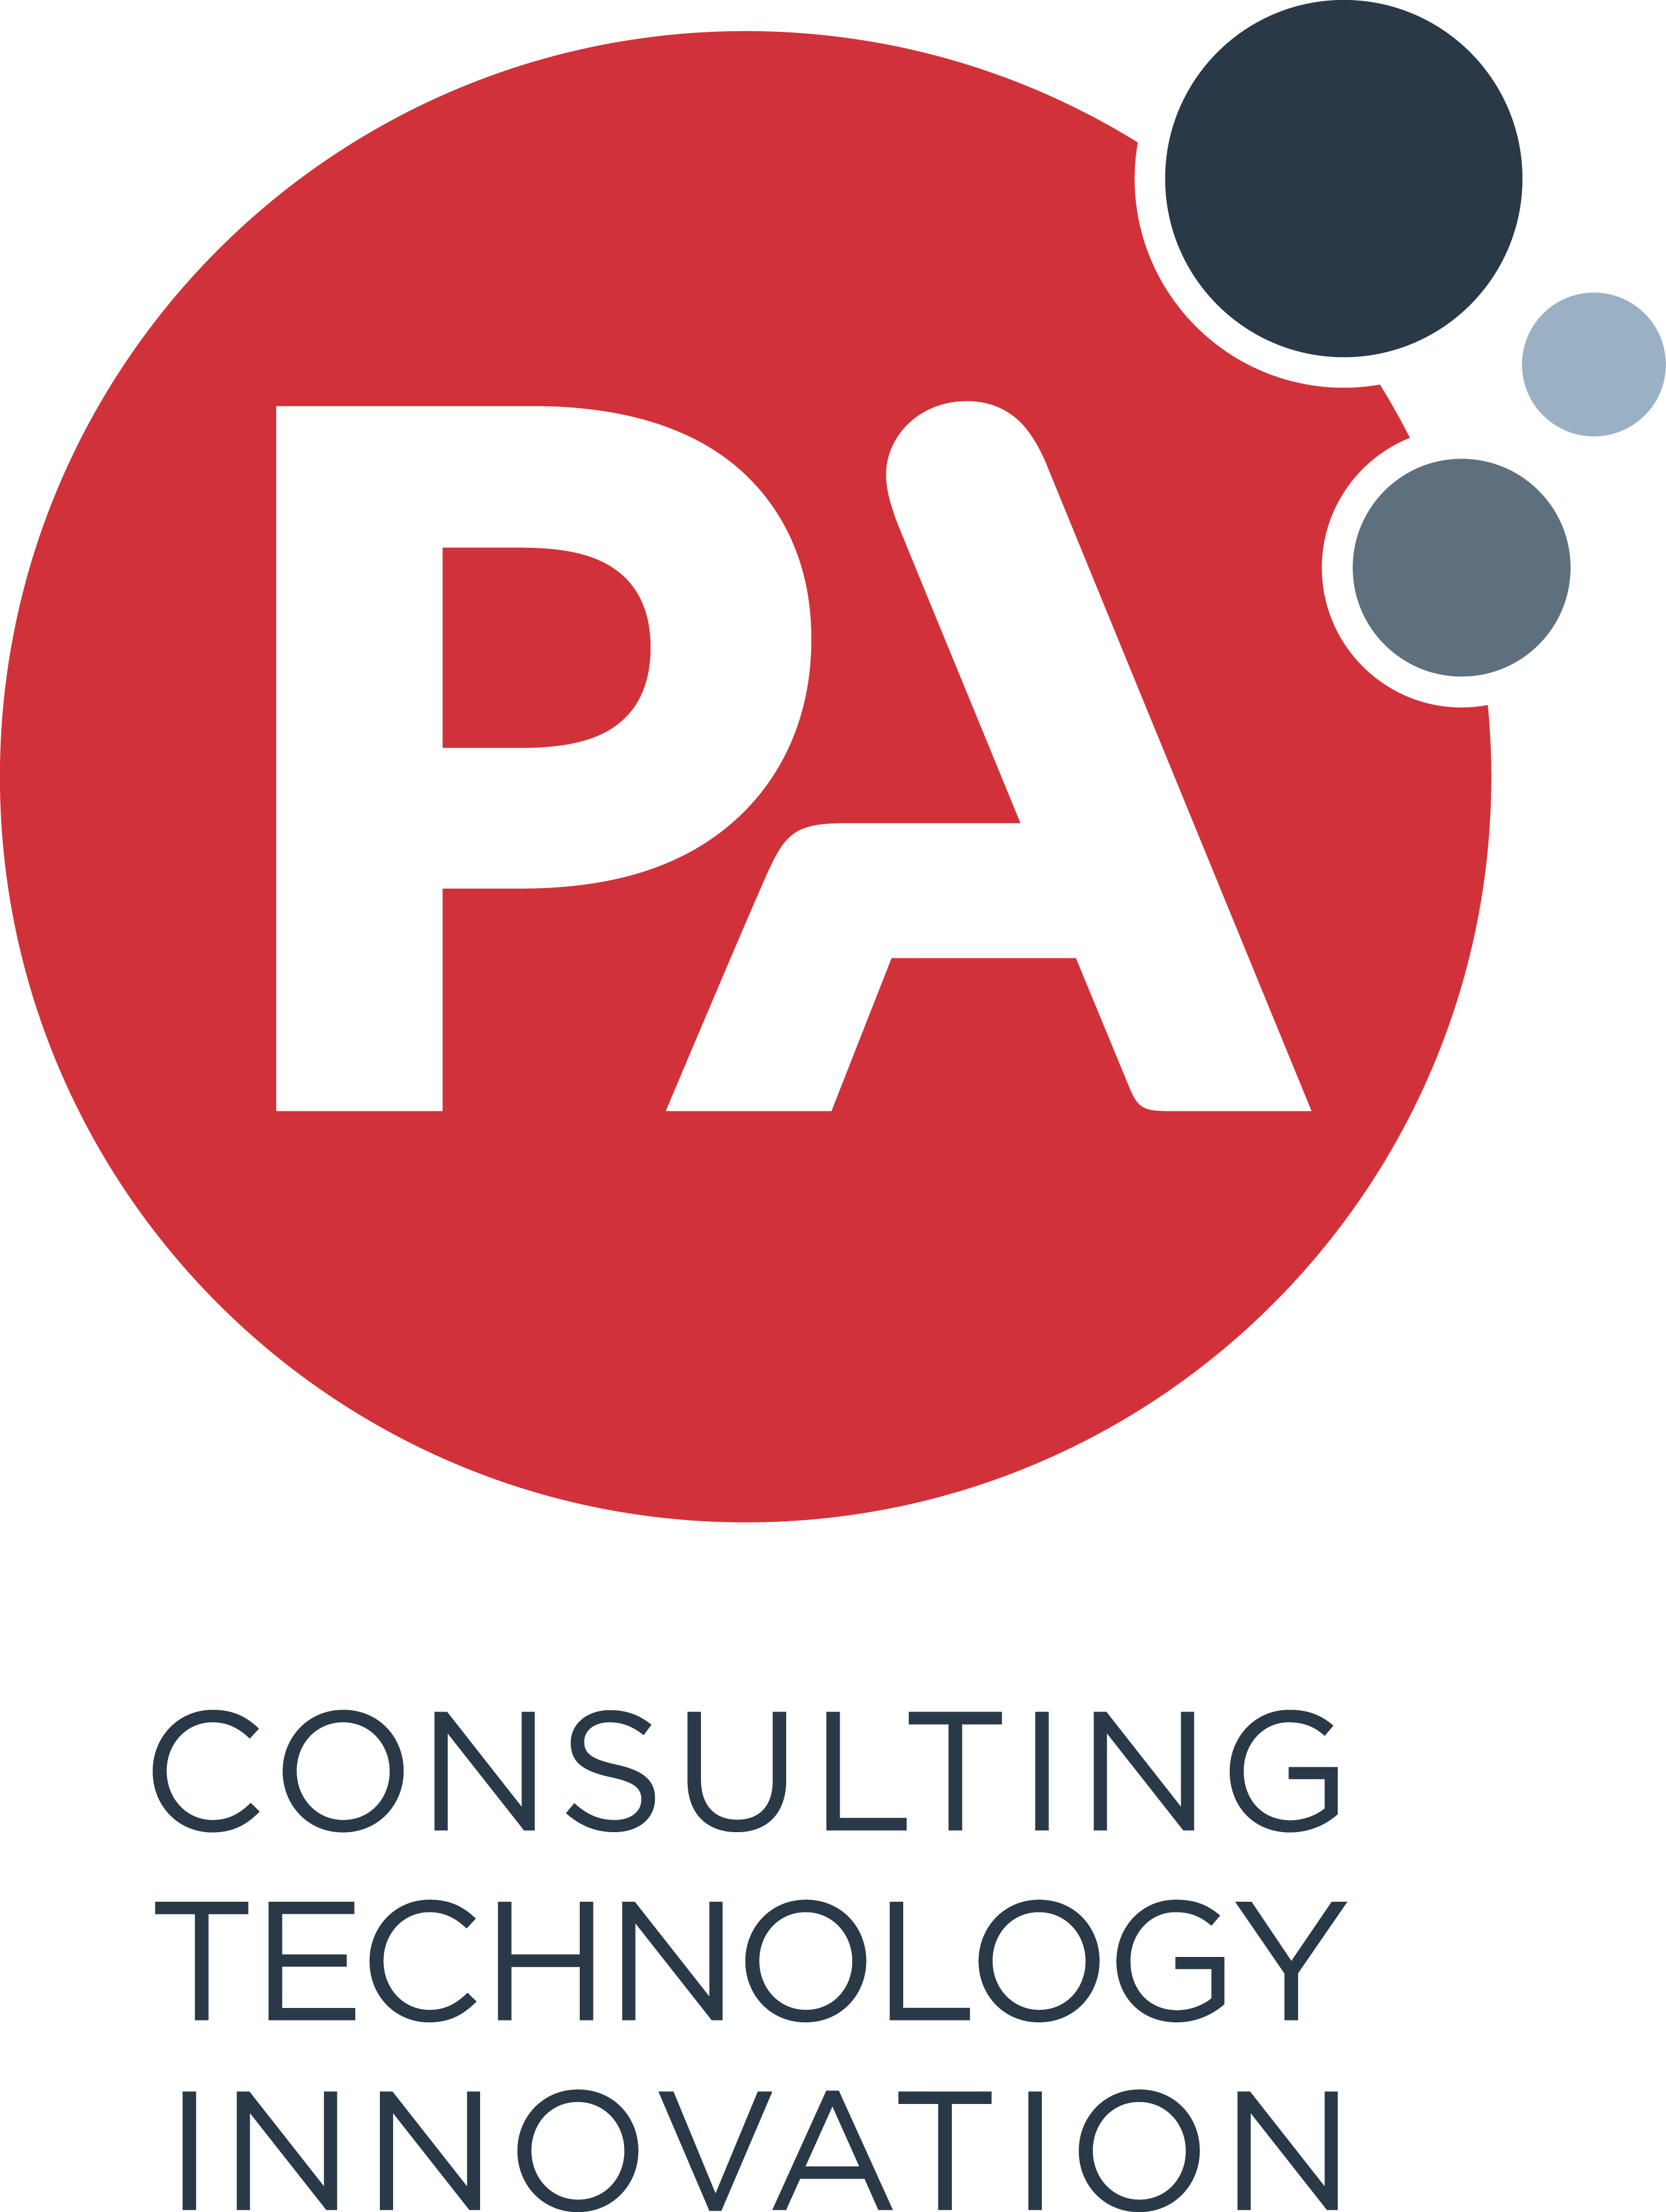 PA consulting logo